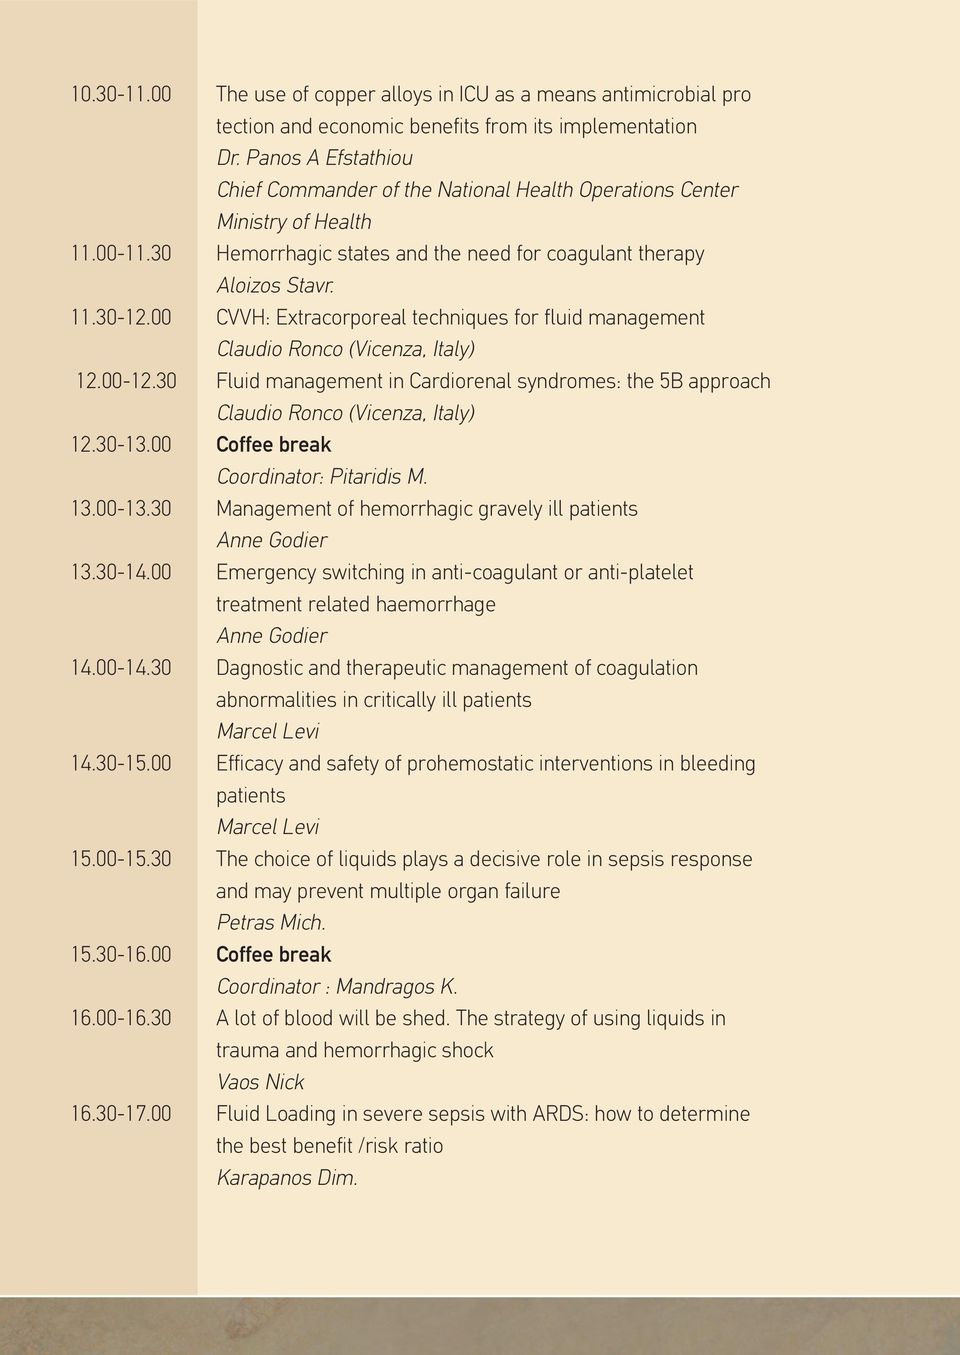 00 CVVH: Extracorporeal techniques for fluid management Claudio Ronco (Vicenza, Italy) 12.00-12.30 Fluid management in Cardiorenal syndromes: the 5B approach Claudio Ronco (Vicenza, Italy) 12.30-13.